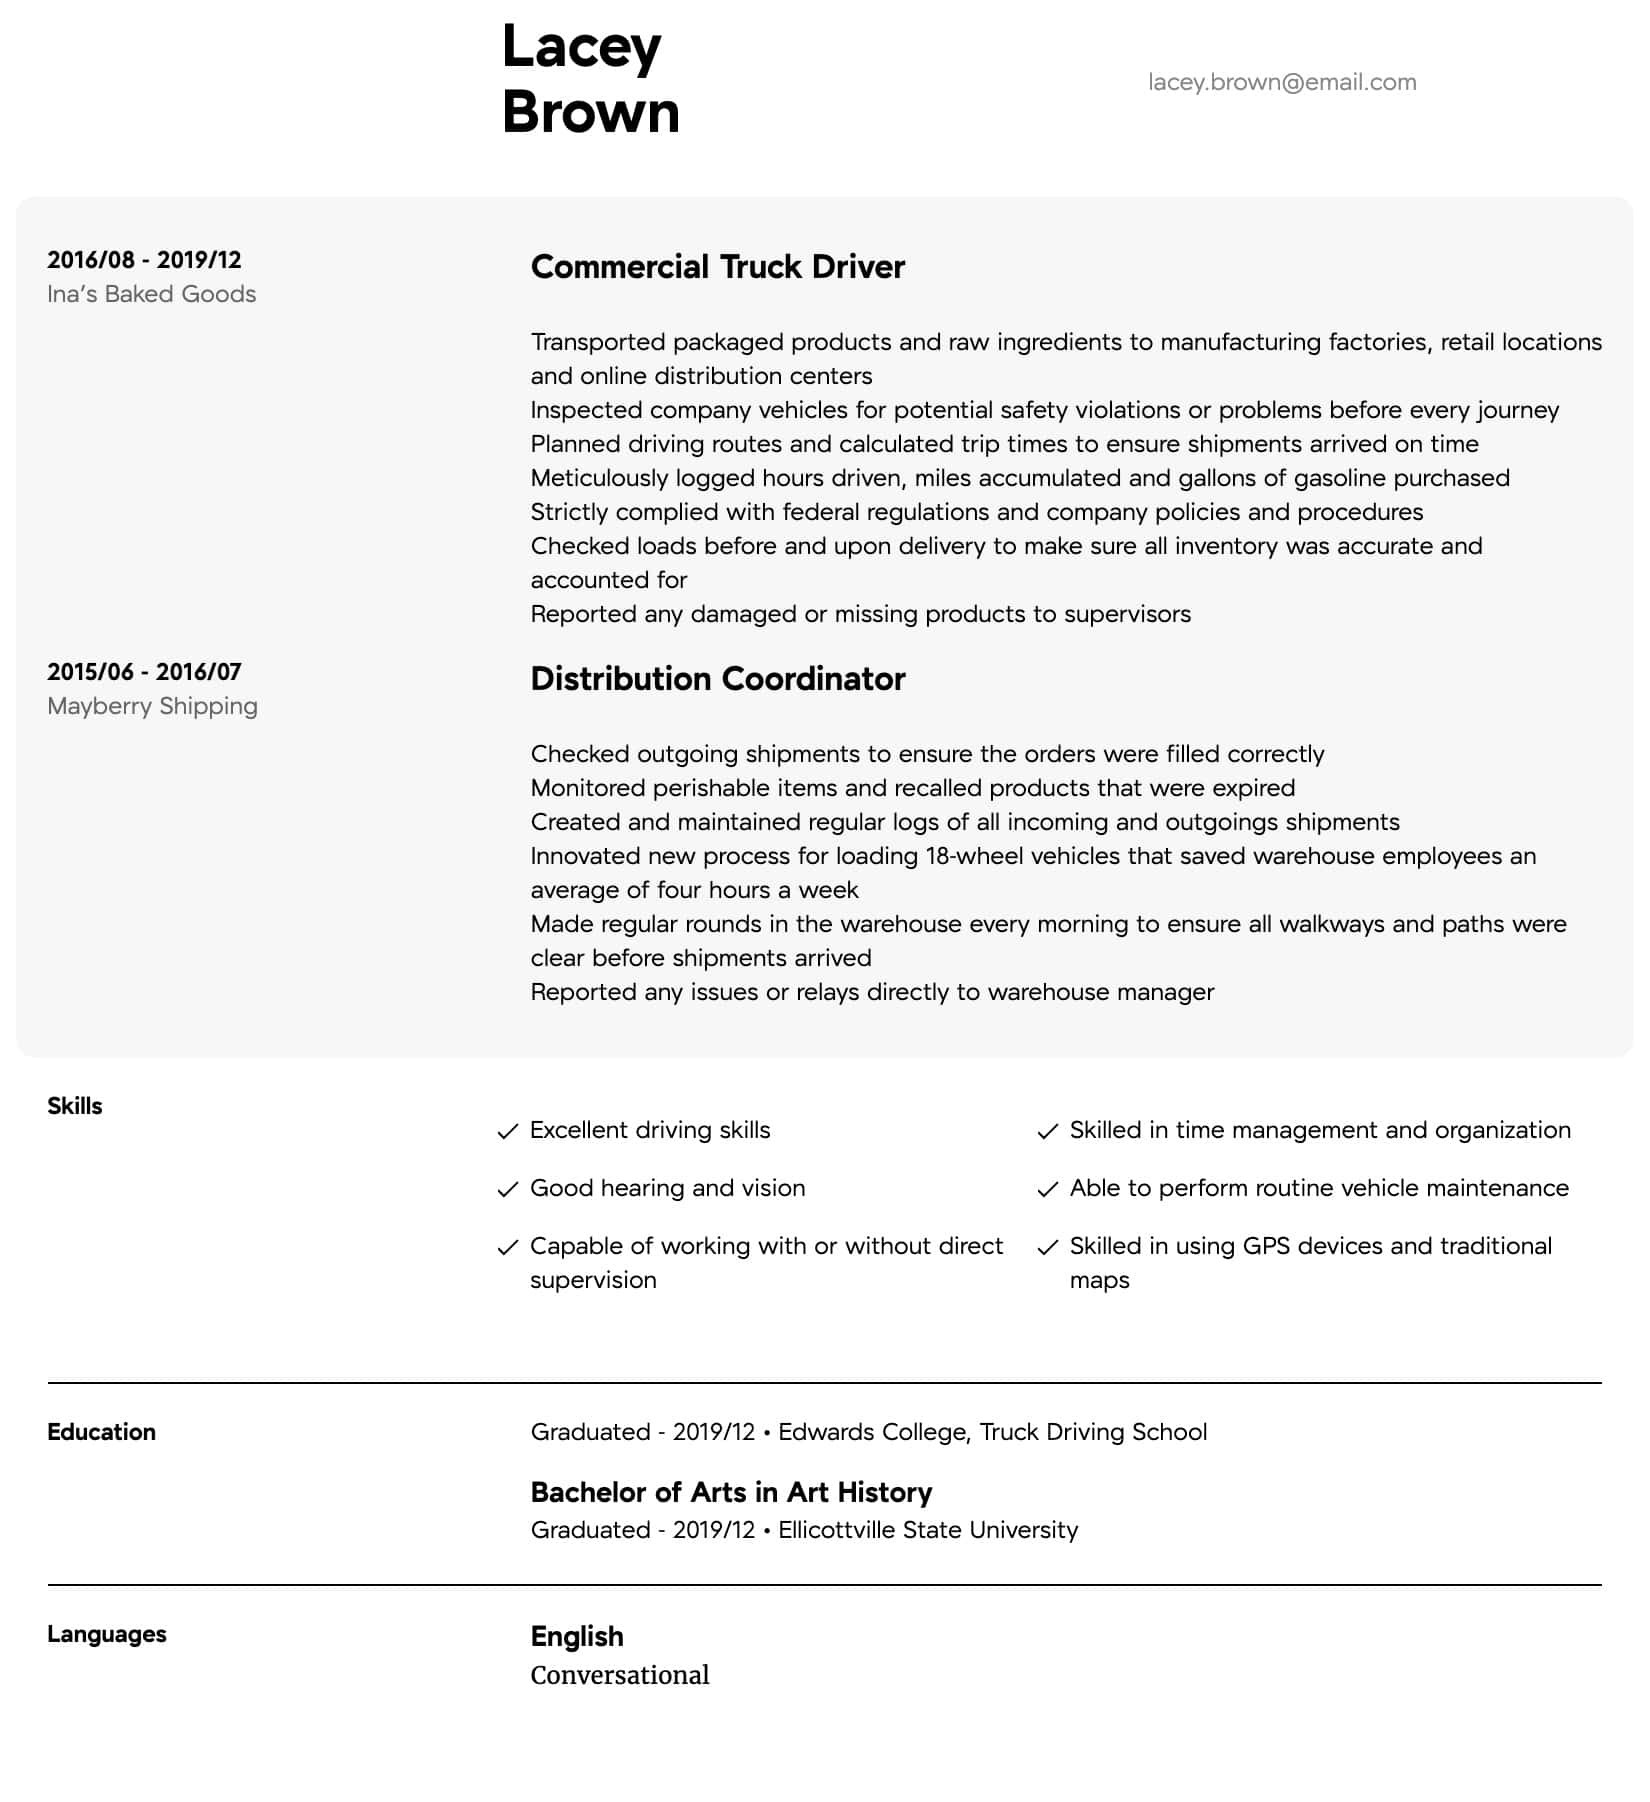 Sample Resume for Cdl Class A Driver Truck Driver Resume Samples All Experience Levels Resume.com …